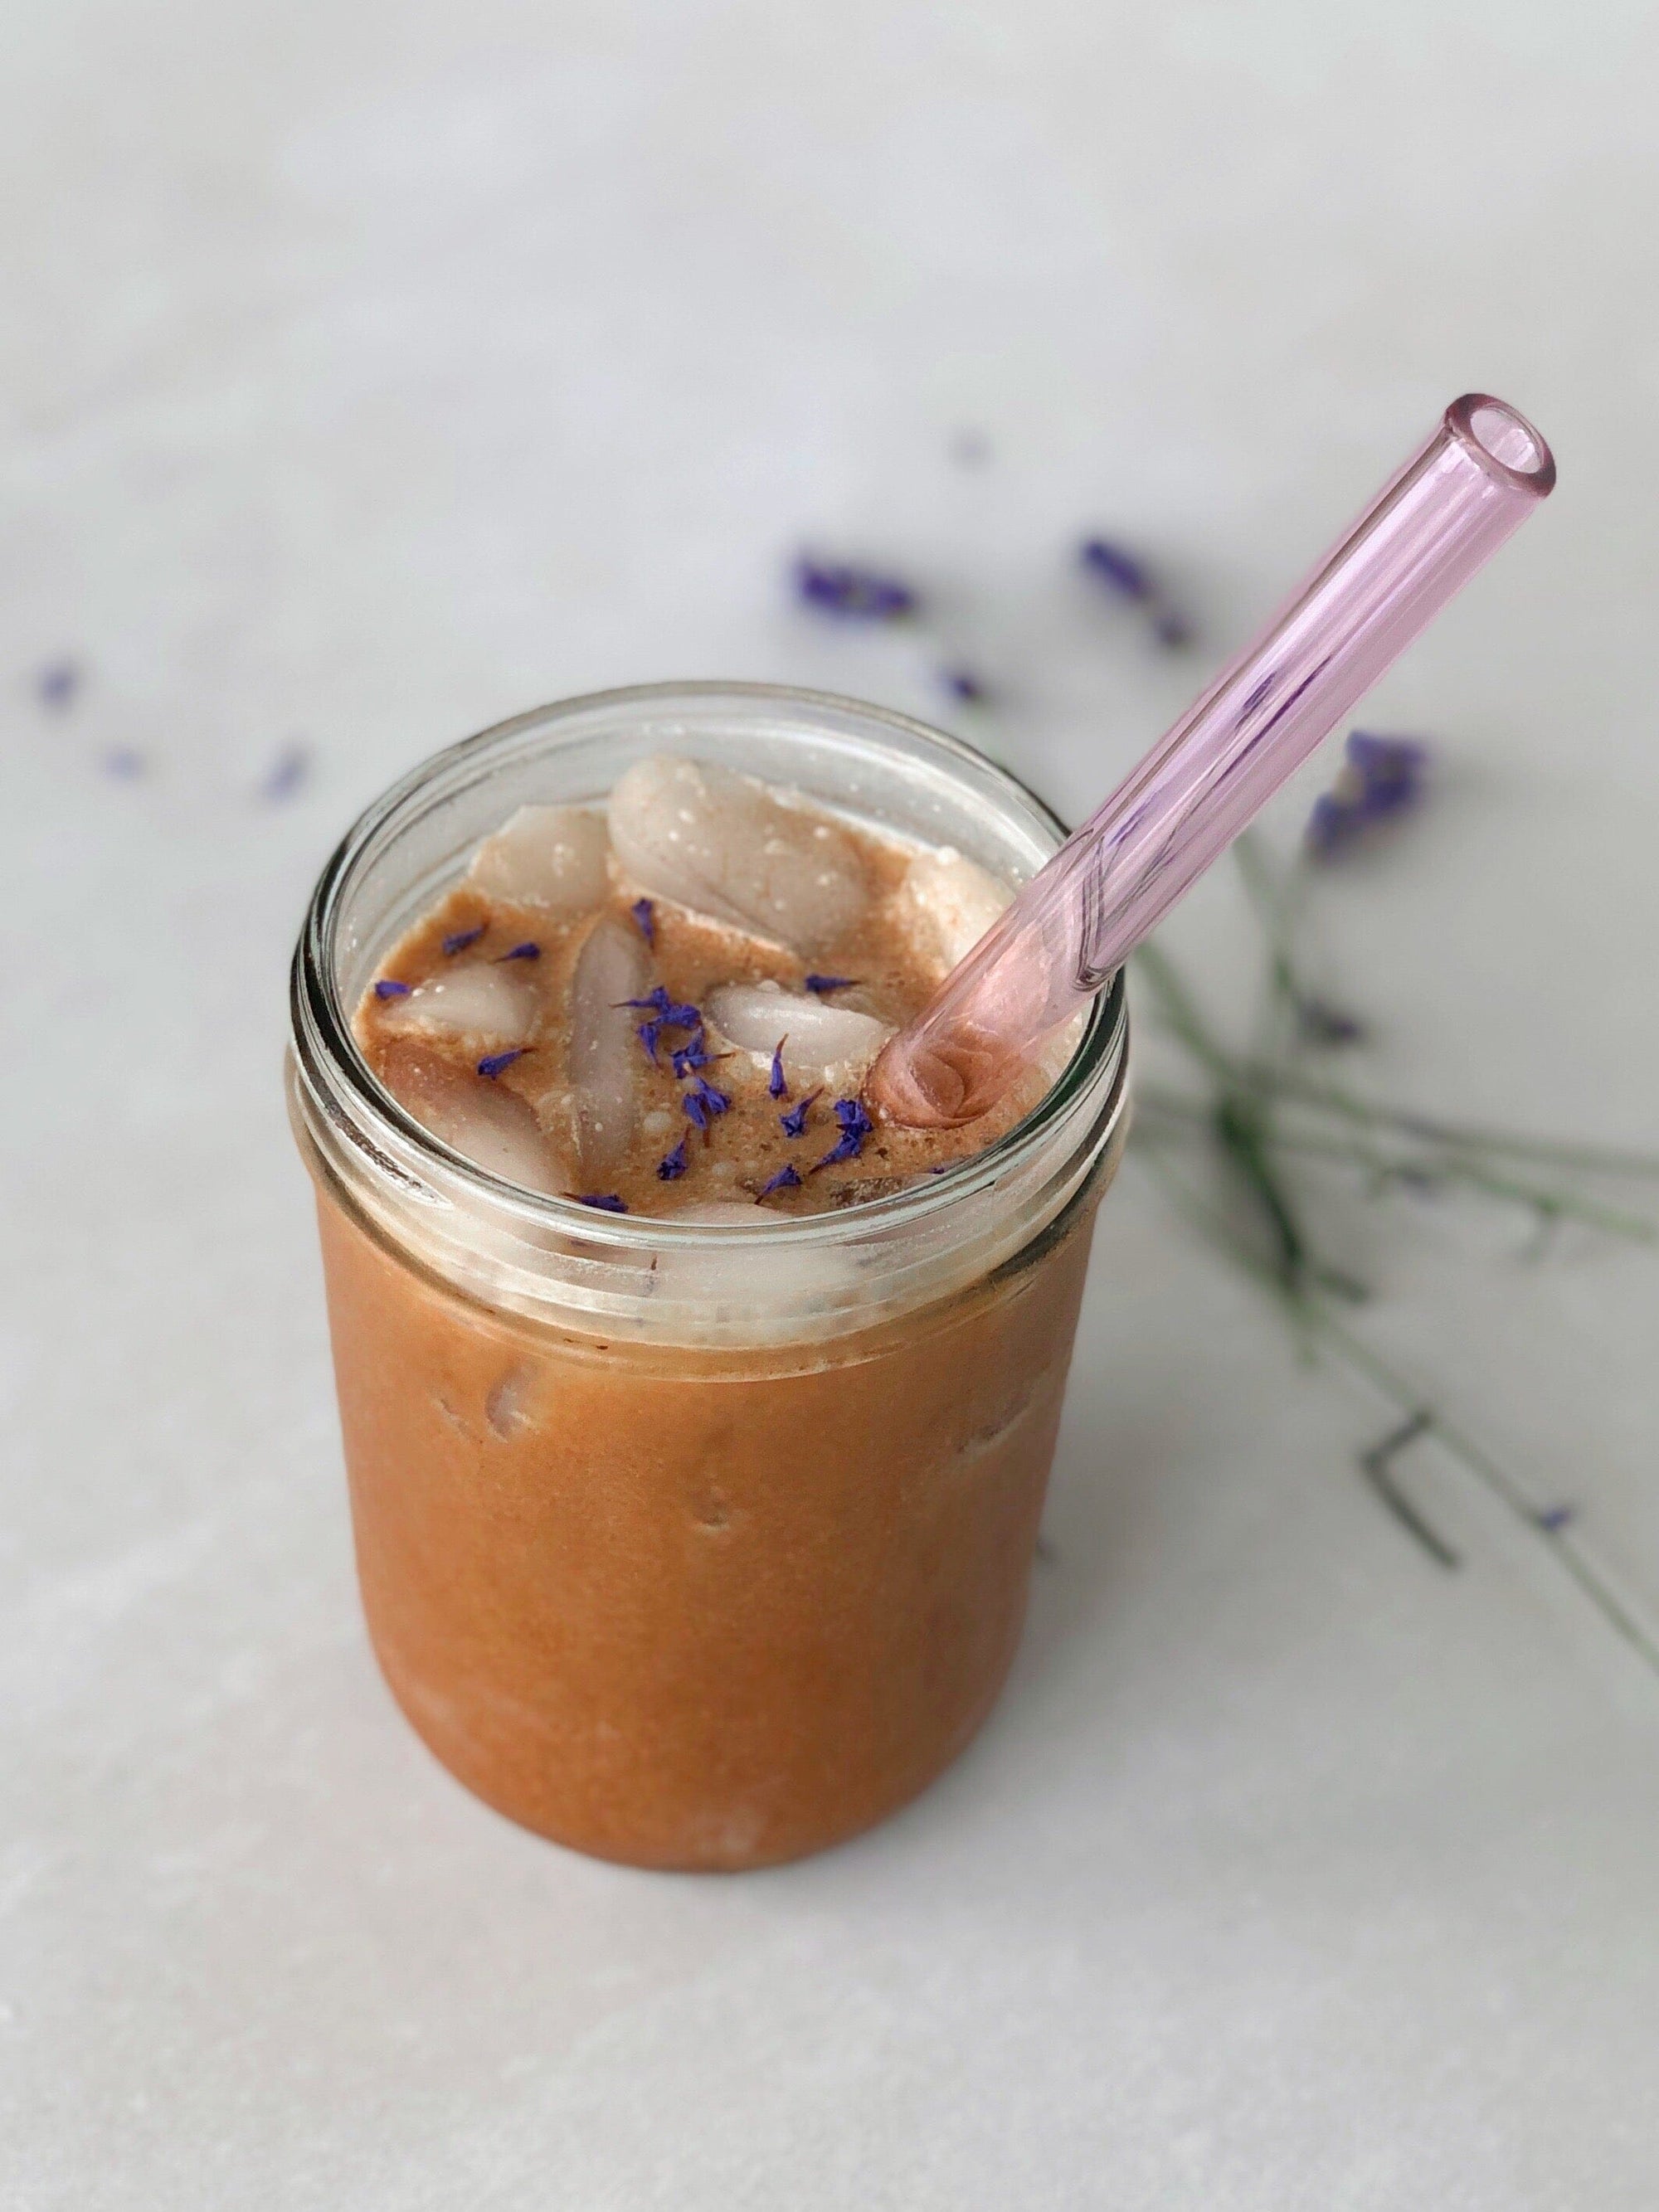 Iced Lavender Cacao or Mocha featuring JOYÀ's Cacao Elixir Blend